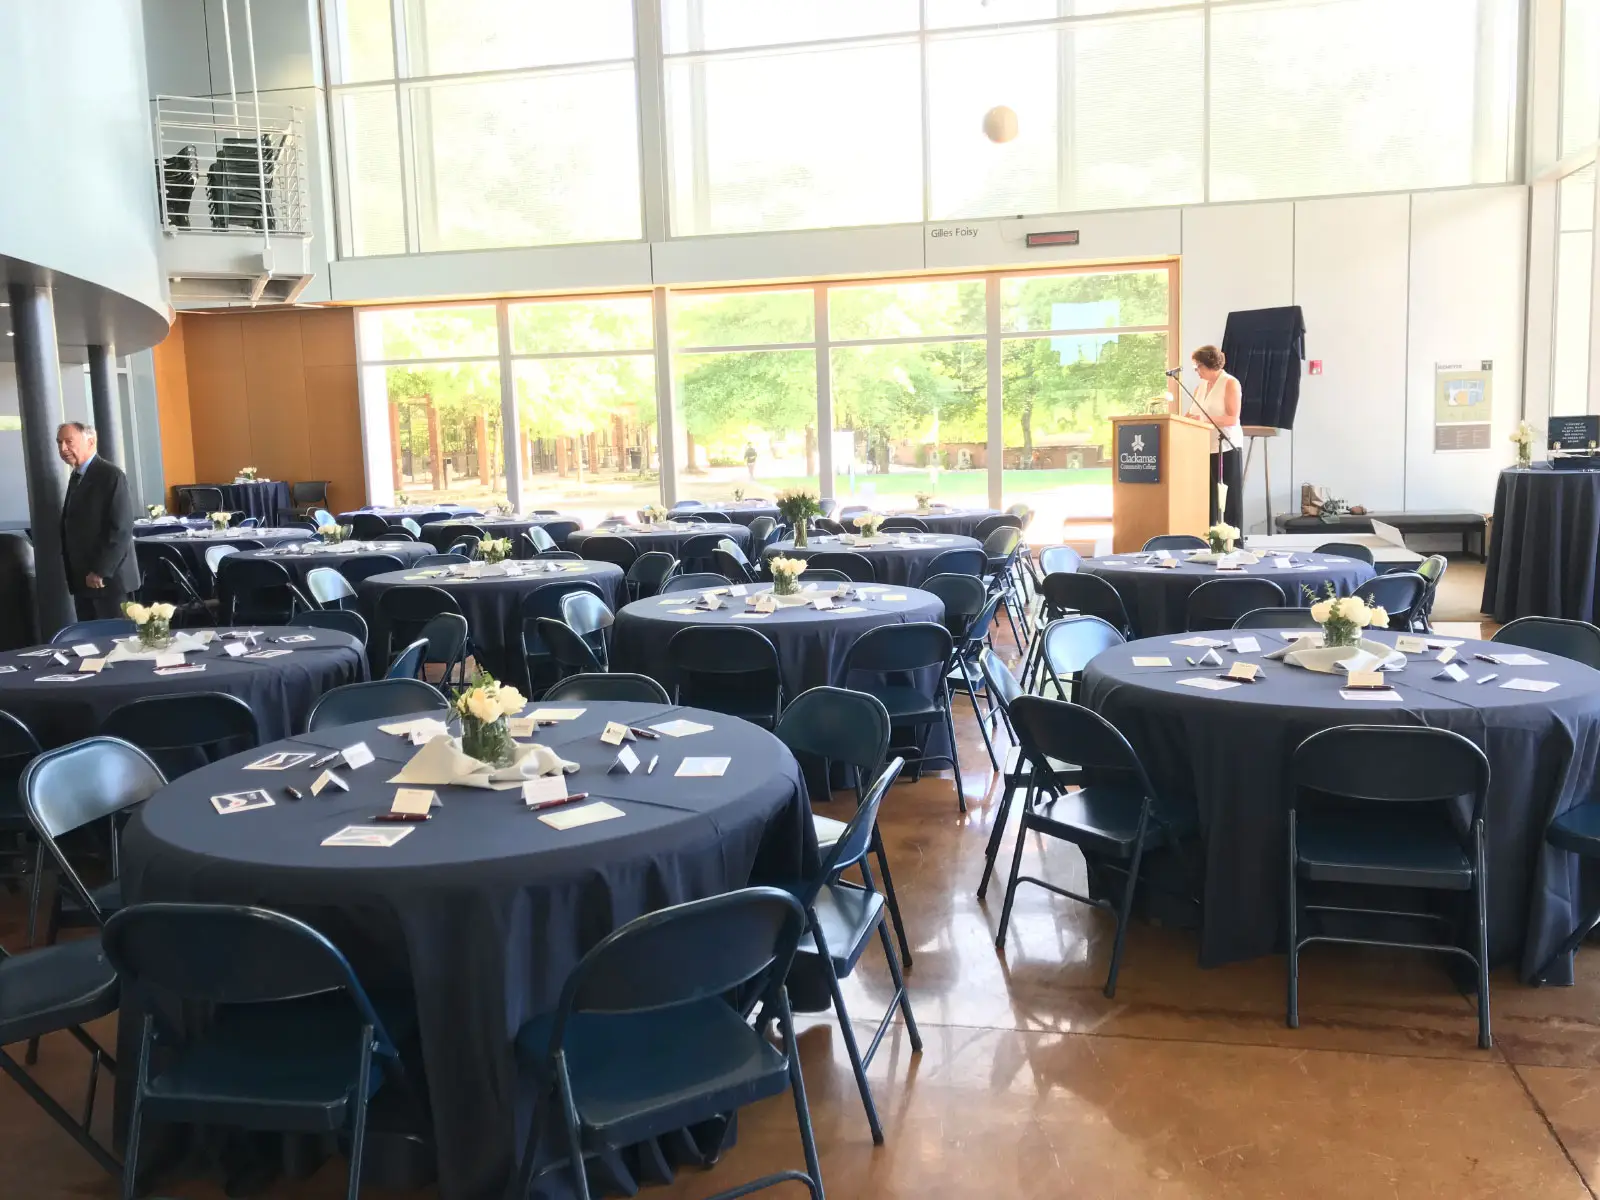 Decorated tables and podium for an event in Niemeyer Center's open lobby at the Oregon CIty campus